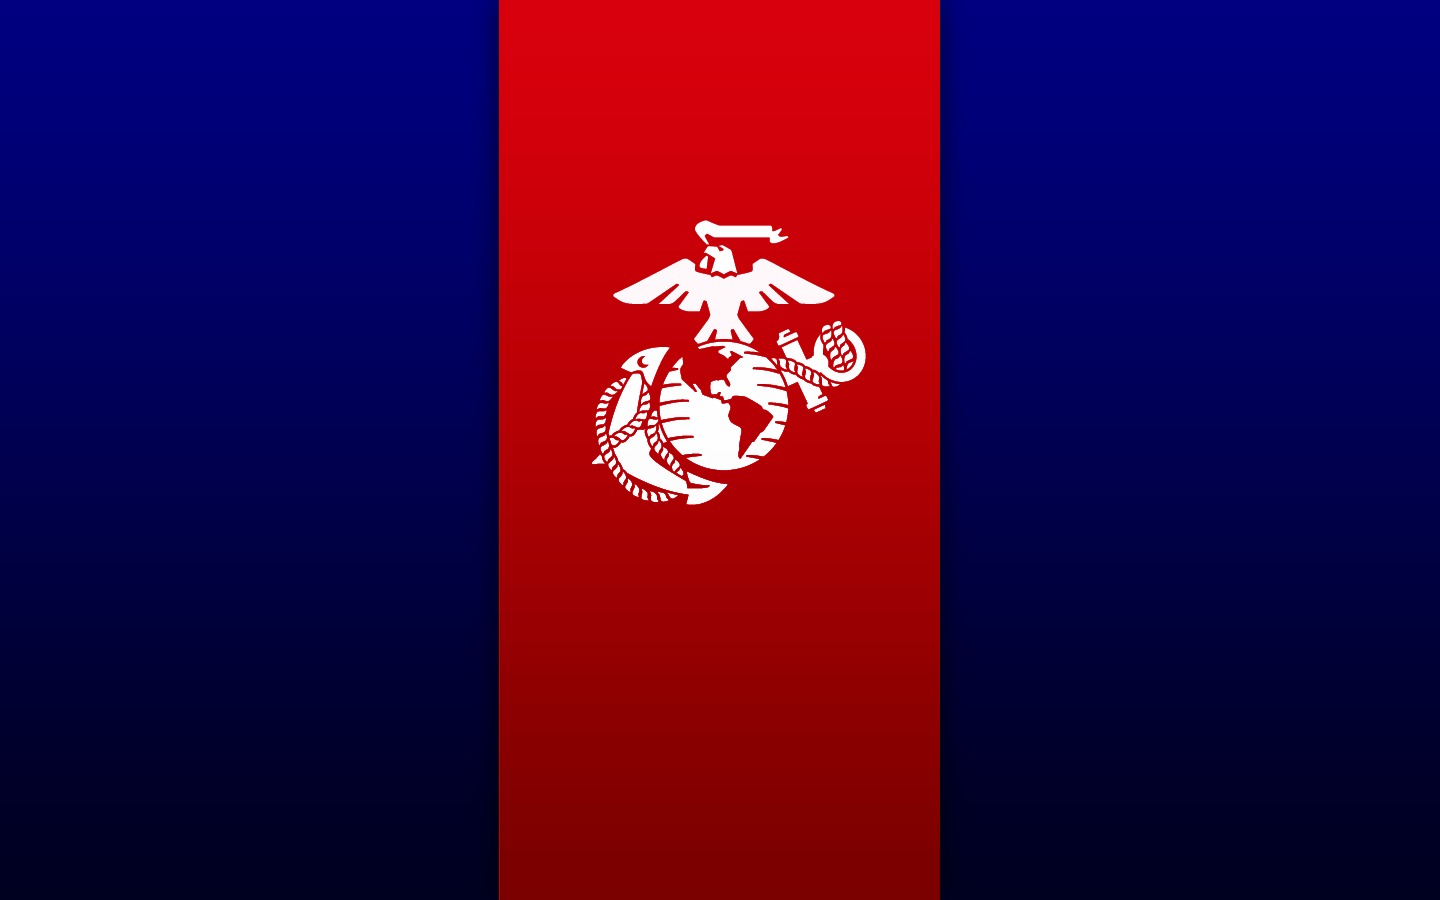 Us Marine Corps Wallpaper and Background